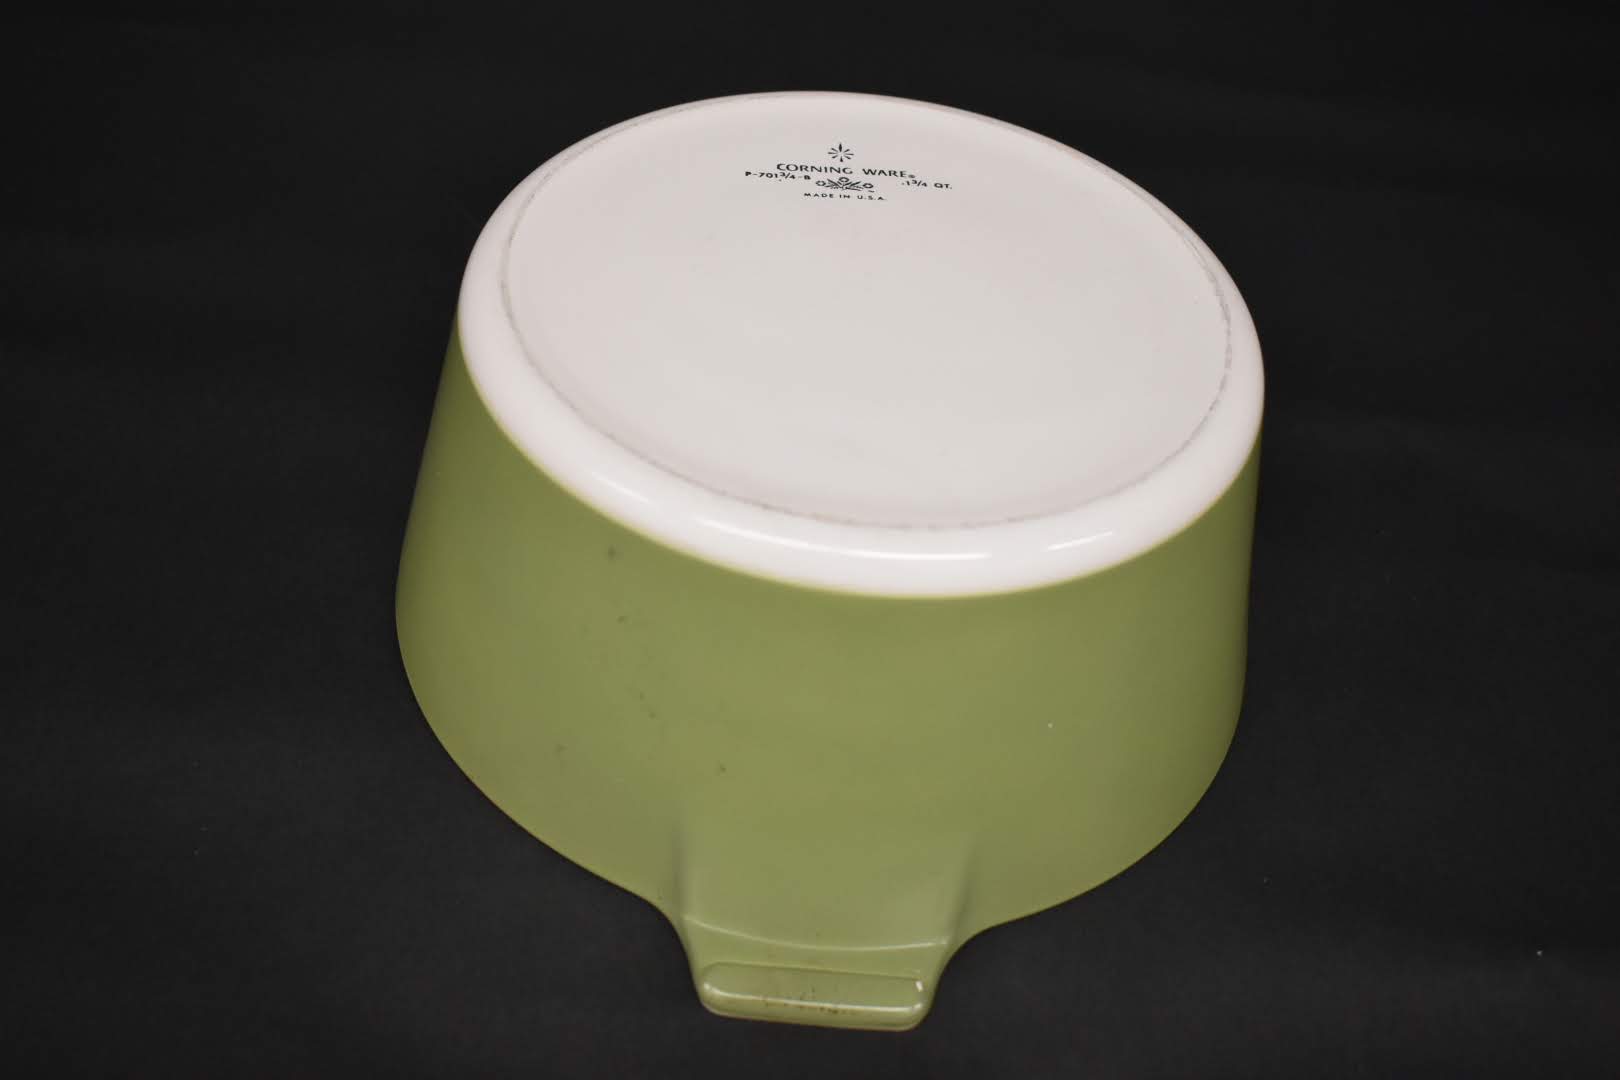 White Green Color - Mid Century Pyrex Casserole - Round Shape Without Lid